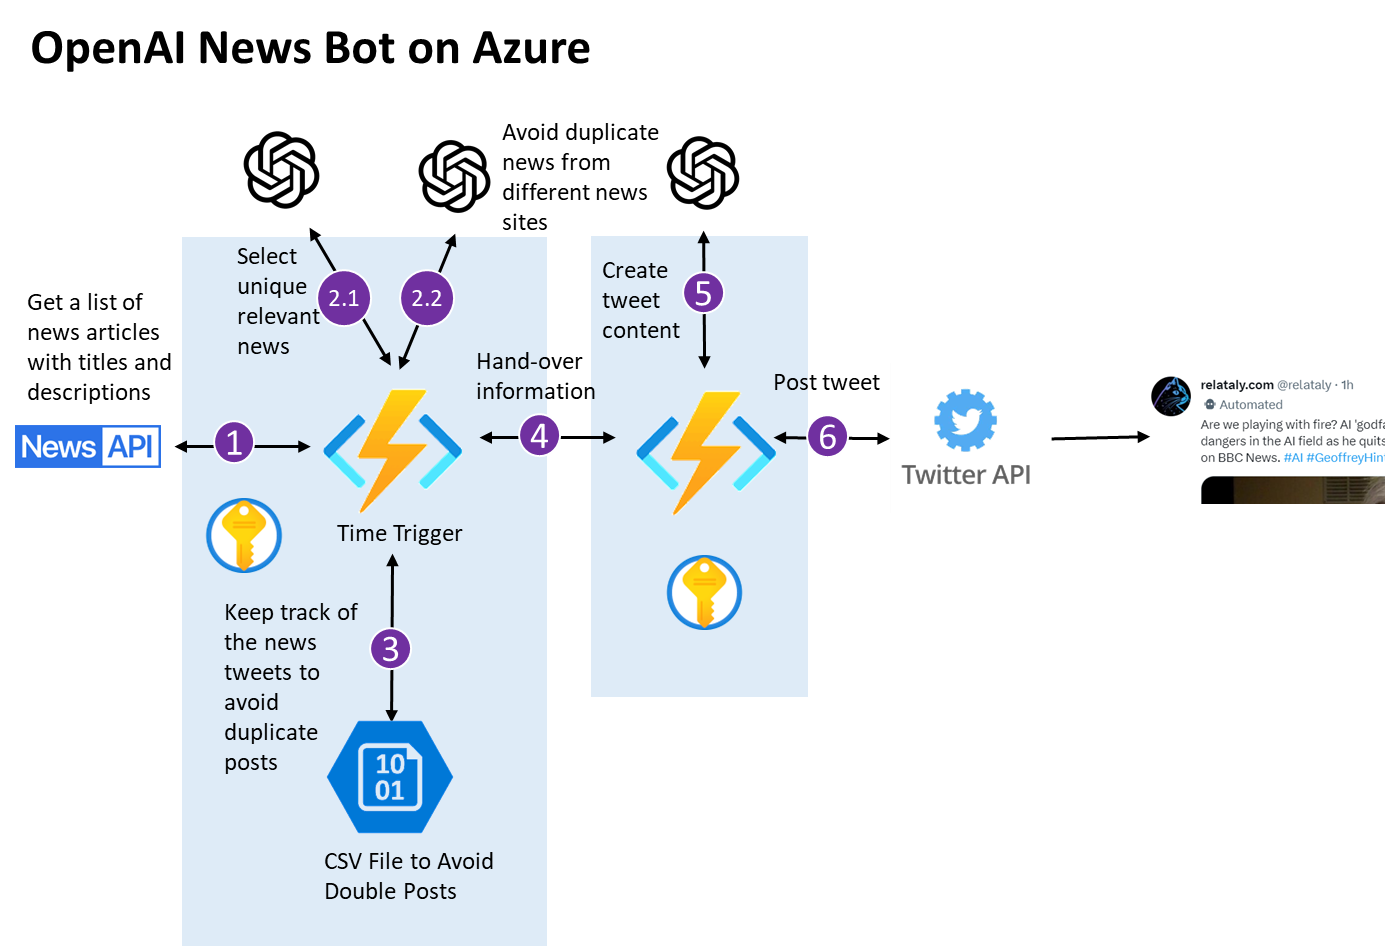 The Relataly OpenAI News Bot runs on a Serverless Infrastructure based on Azure Functions.